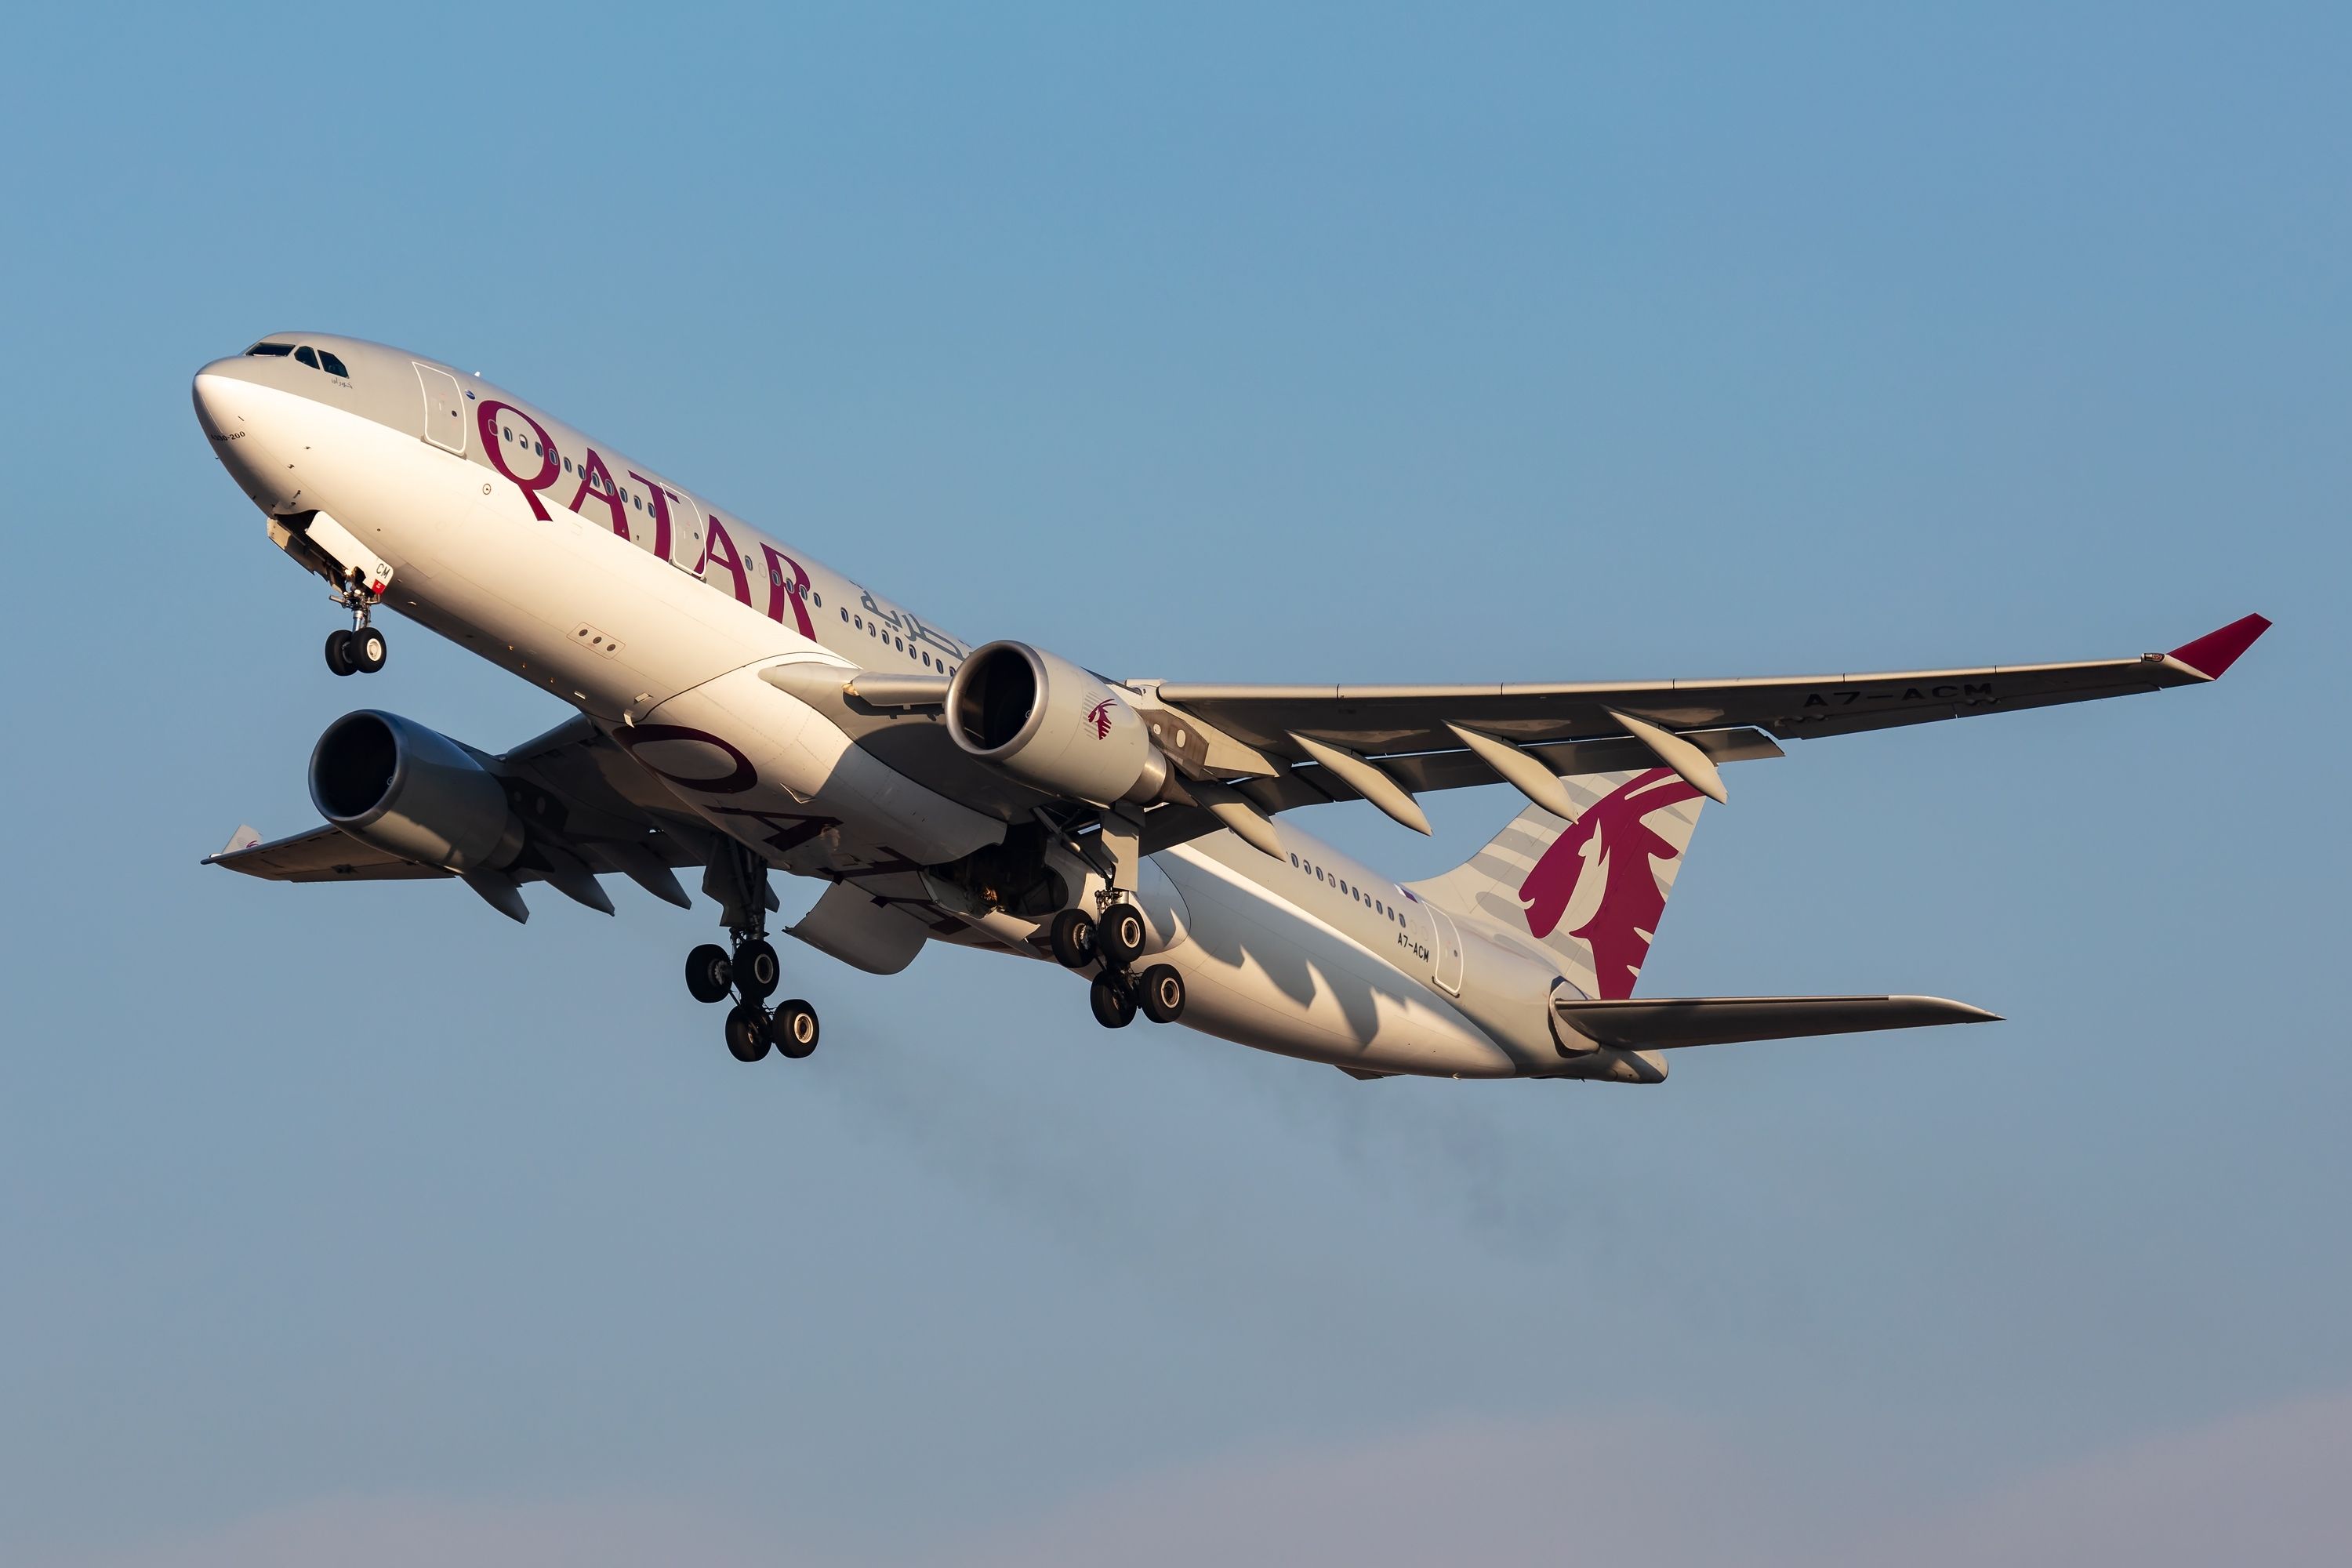 A Qatar Airways Airbus A330-200 flying in the sky.